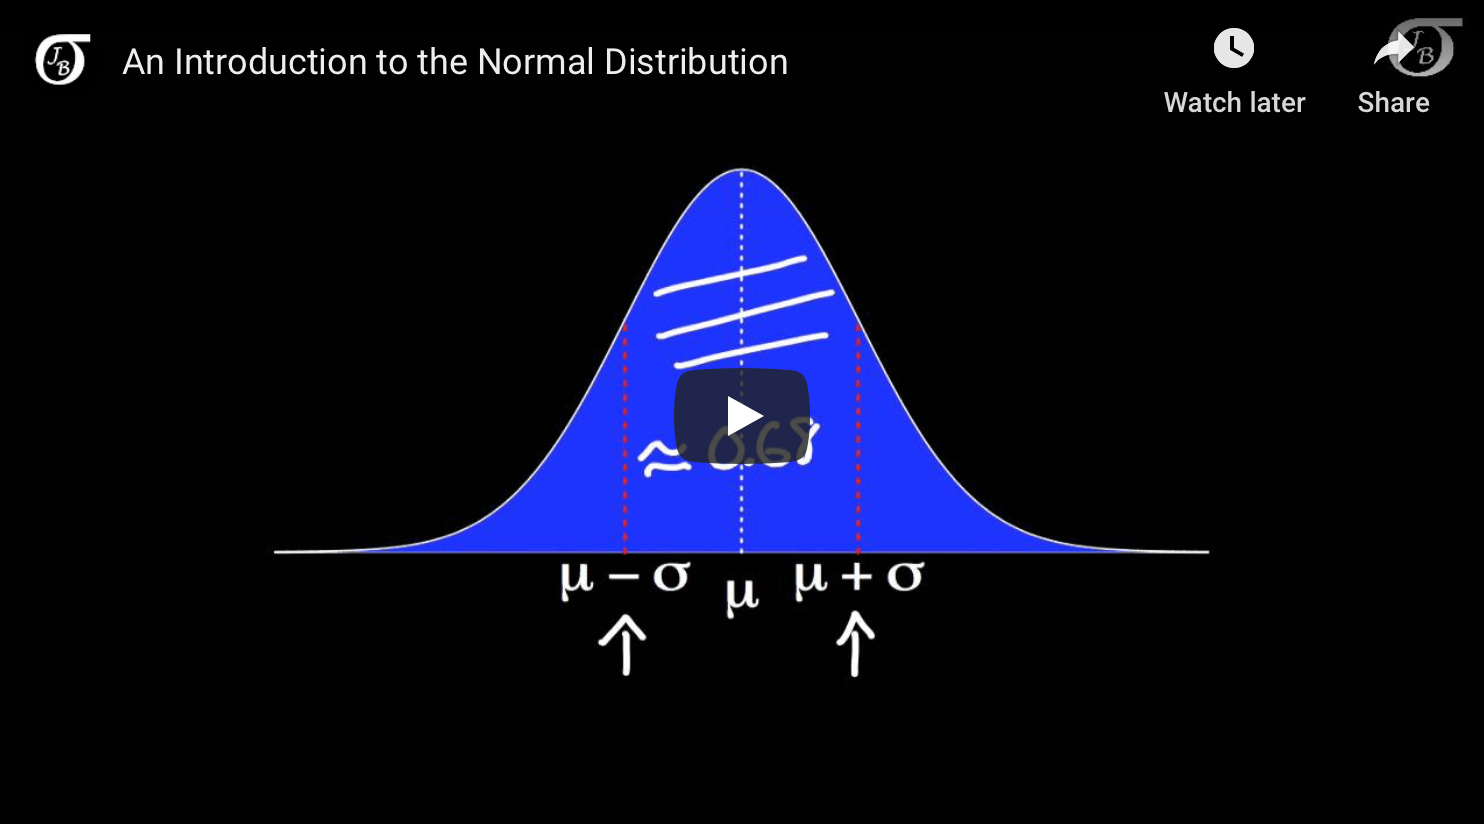 An Introduction to the Normal Distrubtion